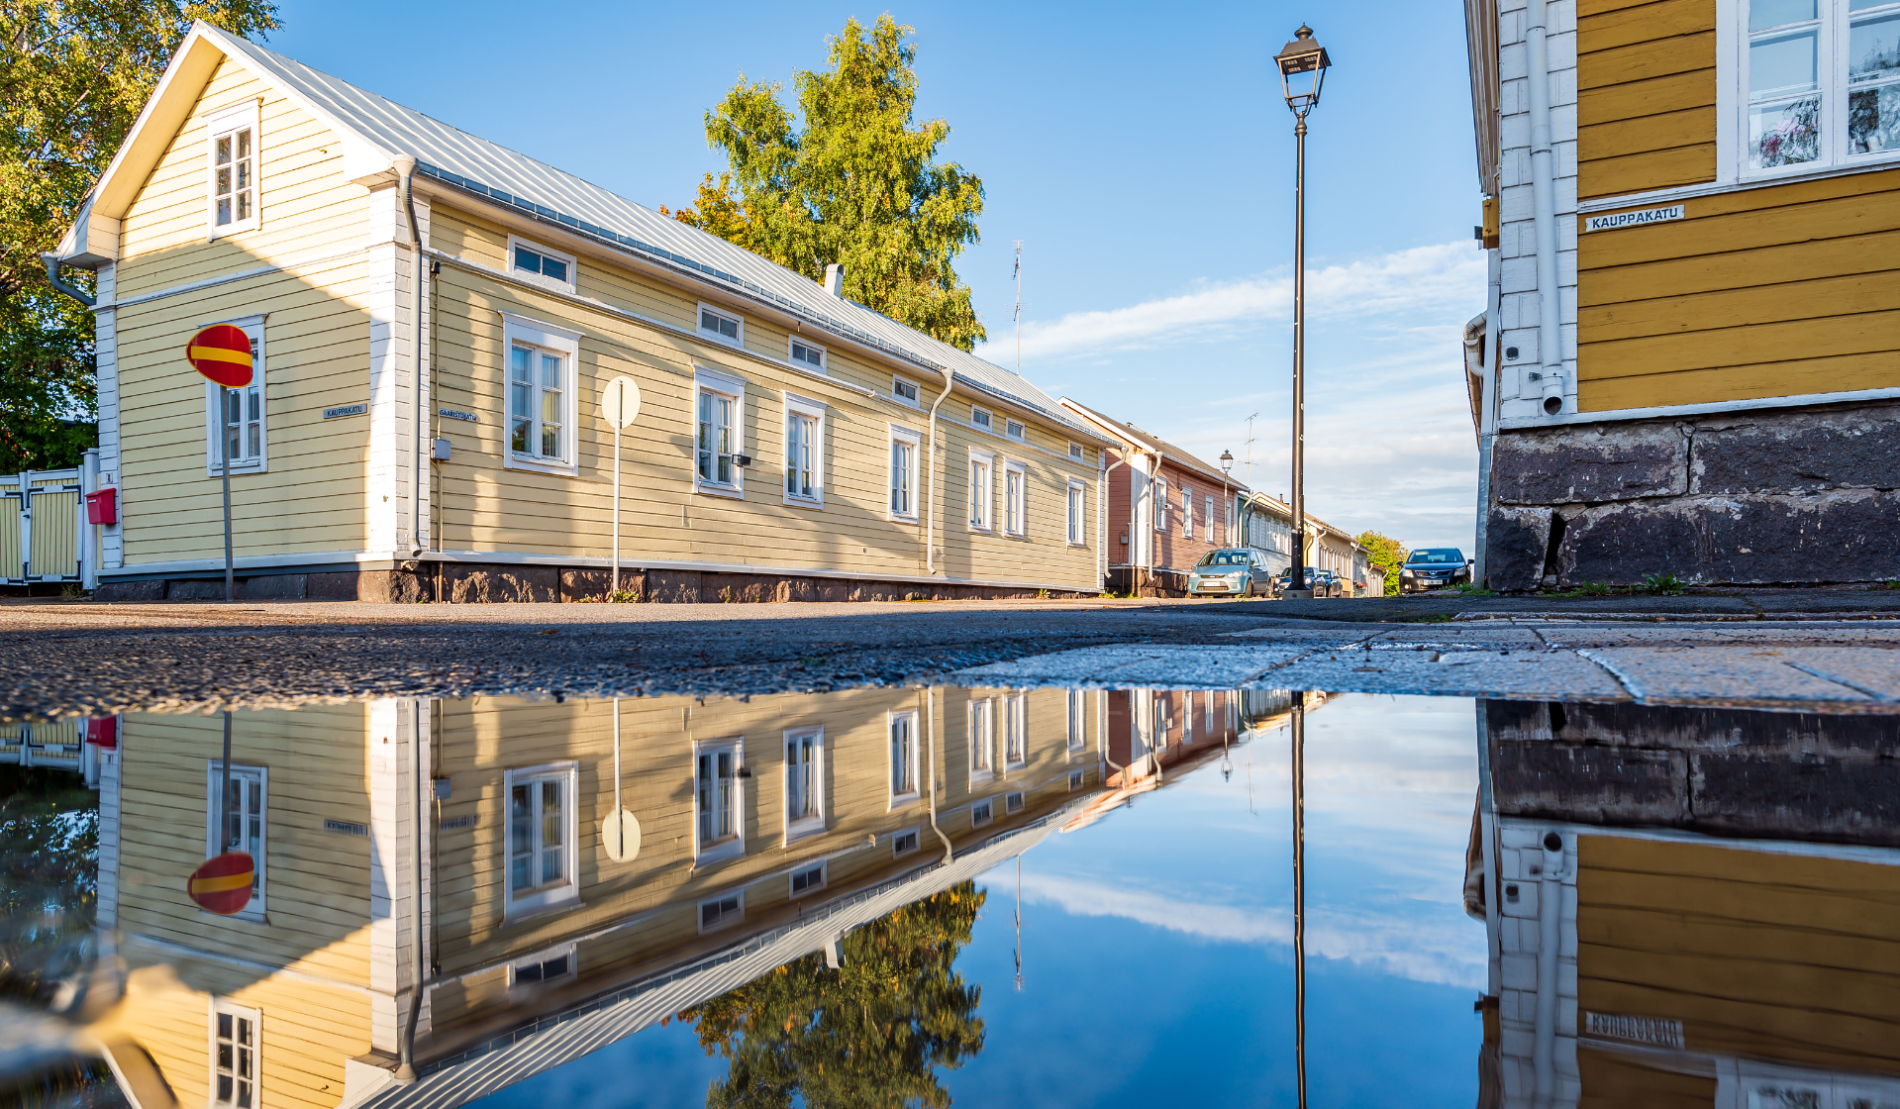 The wooden house and its reflection in the water on the street in old town Raahe.